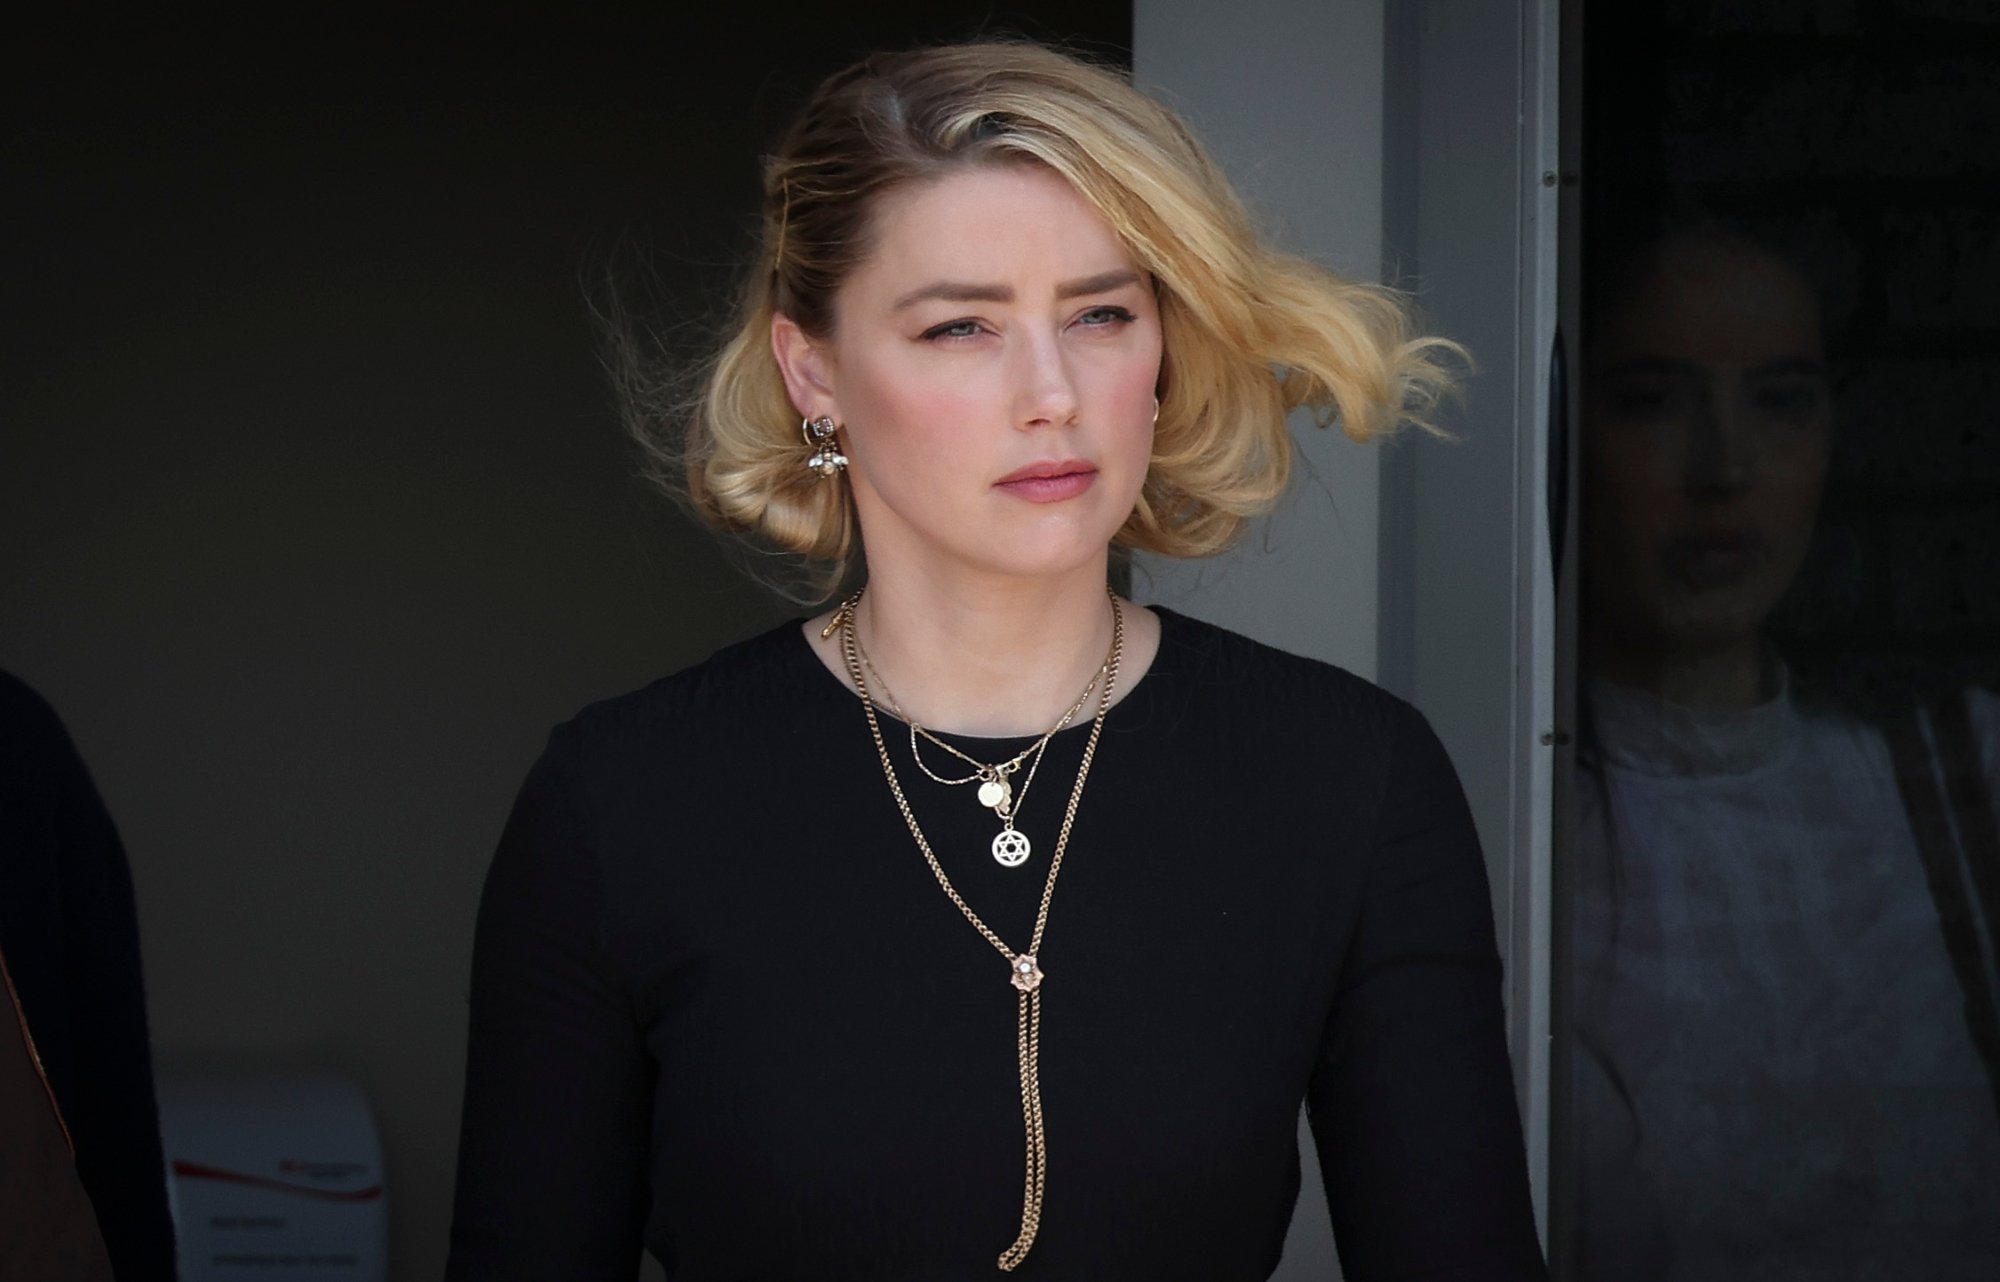 Amber Heard, who talked about free speech in her trial with Johnny Depp. She's wearing a long-sleeve black shirt and gold necklaces with her hair blowing in the wind.